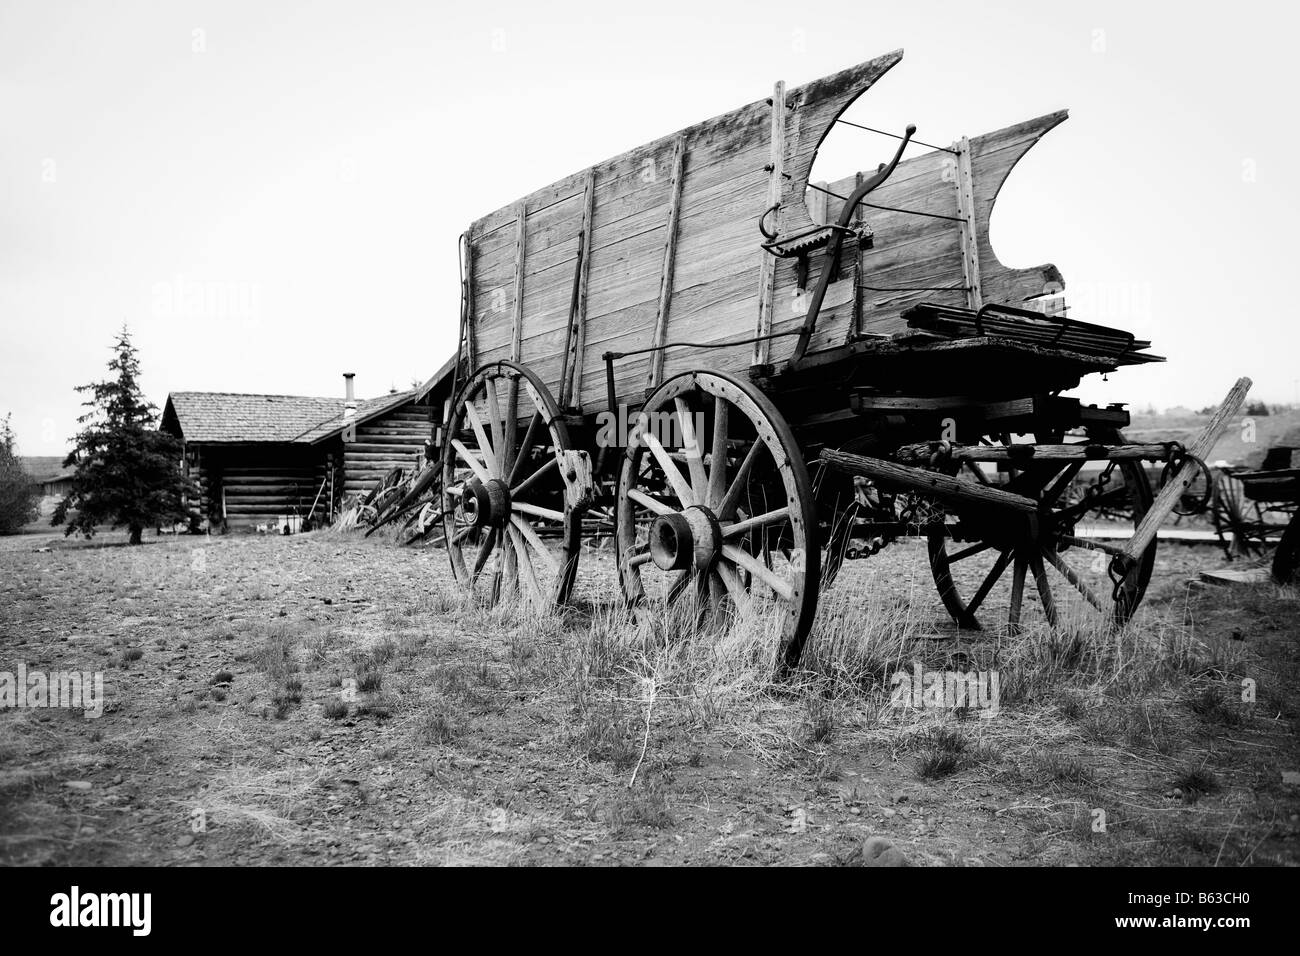 Abandoned horse carts in a grassy field, Old Trail Town, Cody, Wyoming, USA Stock Photo